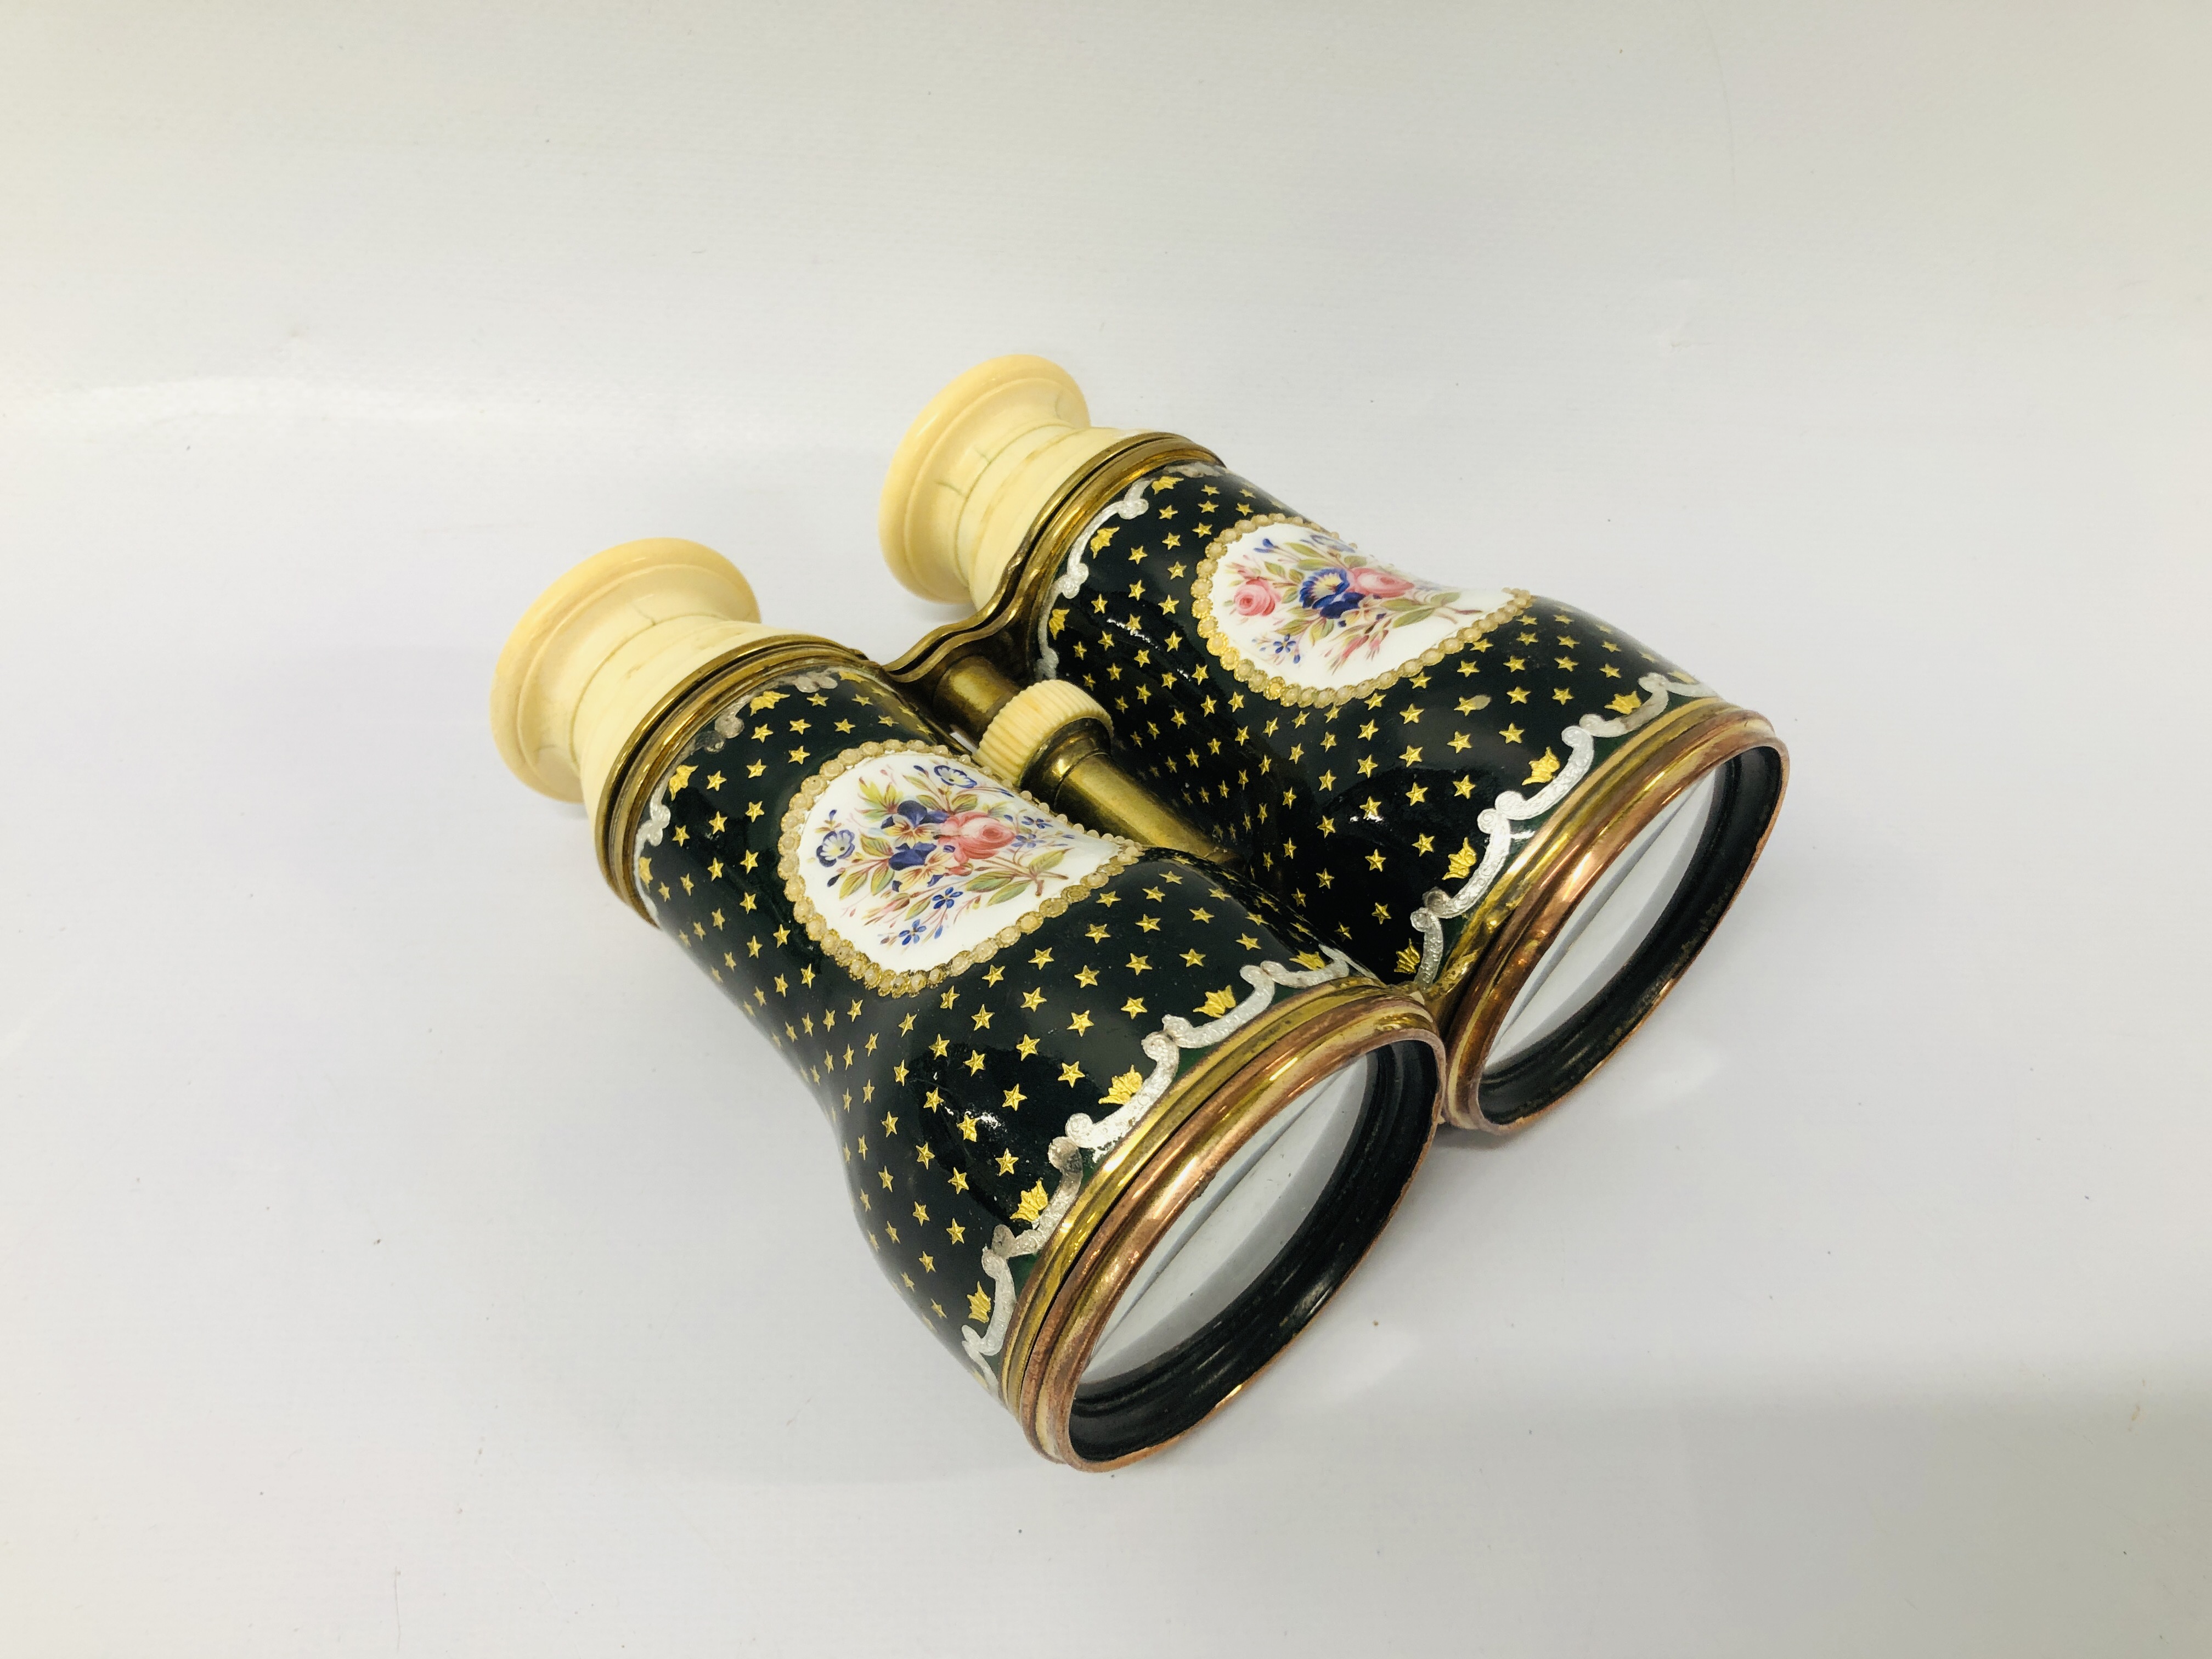 PAIR OF ANTIQUE IVORY AND ENAMEL OPERA GLASSES C1880 - Image 2 of 8